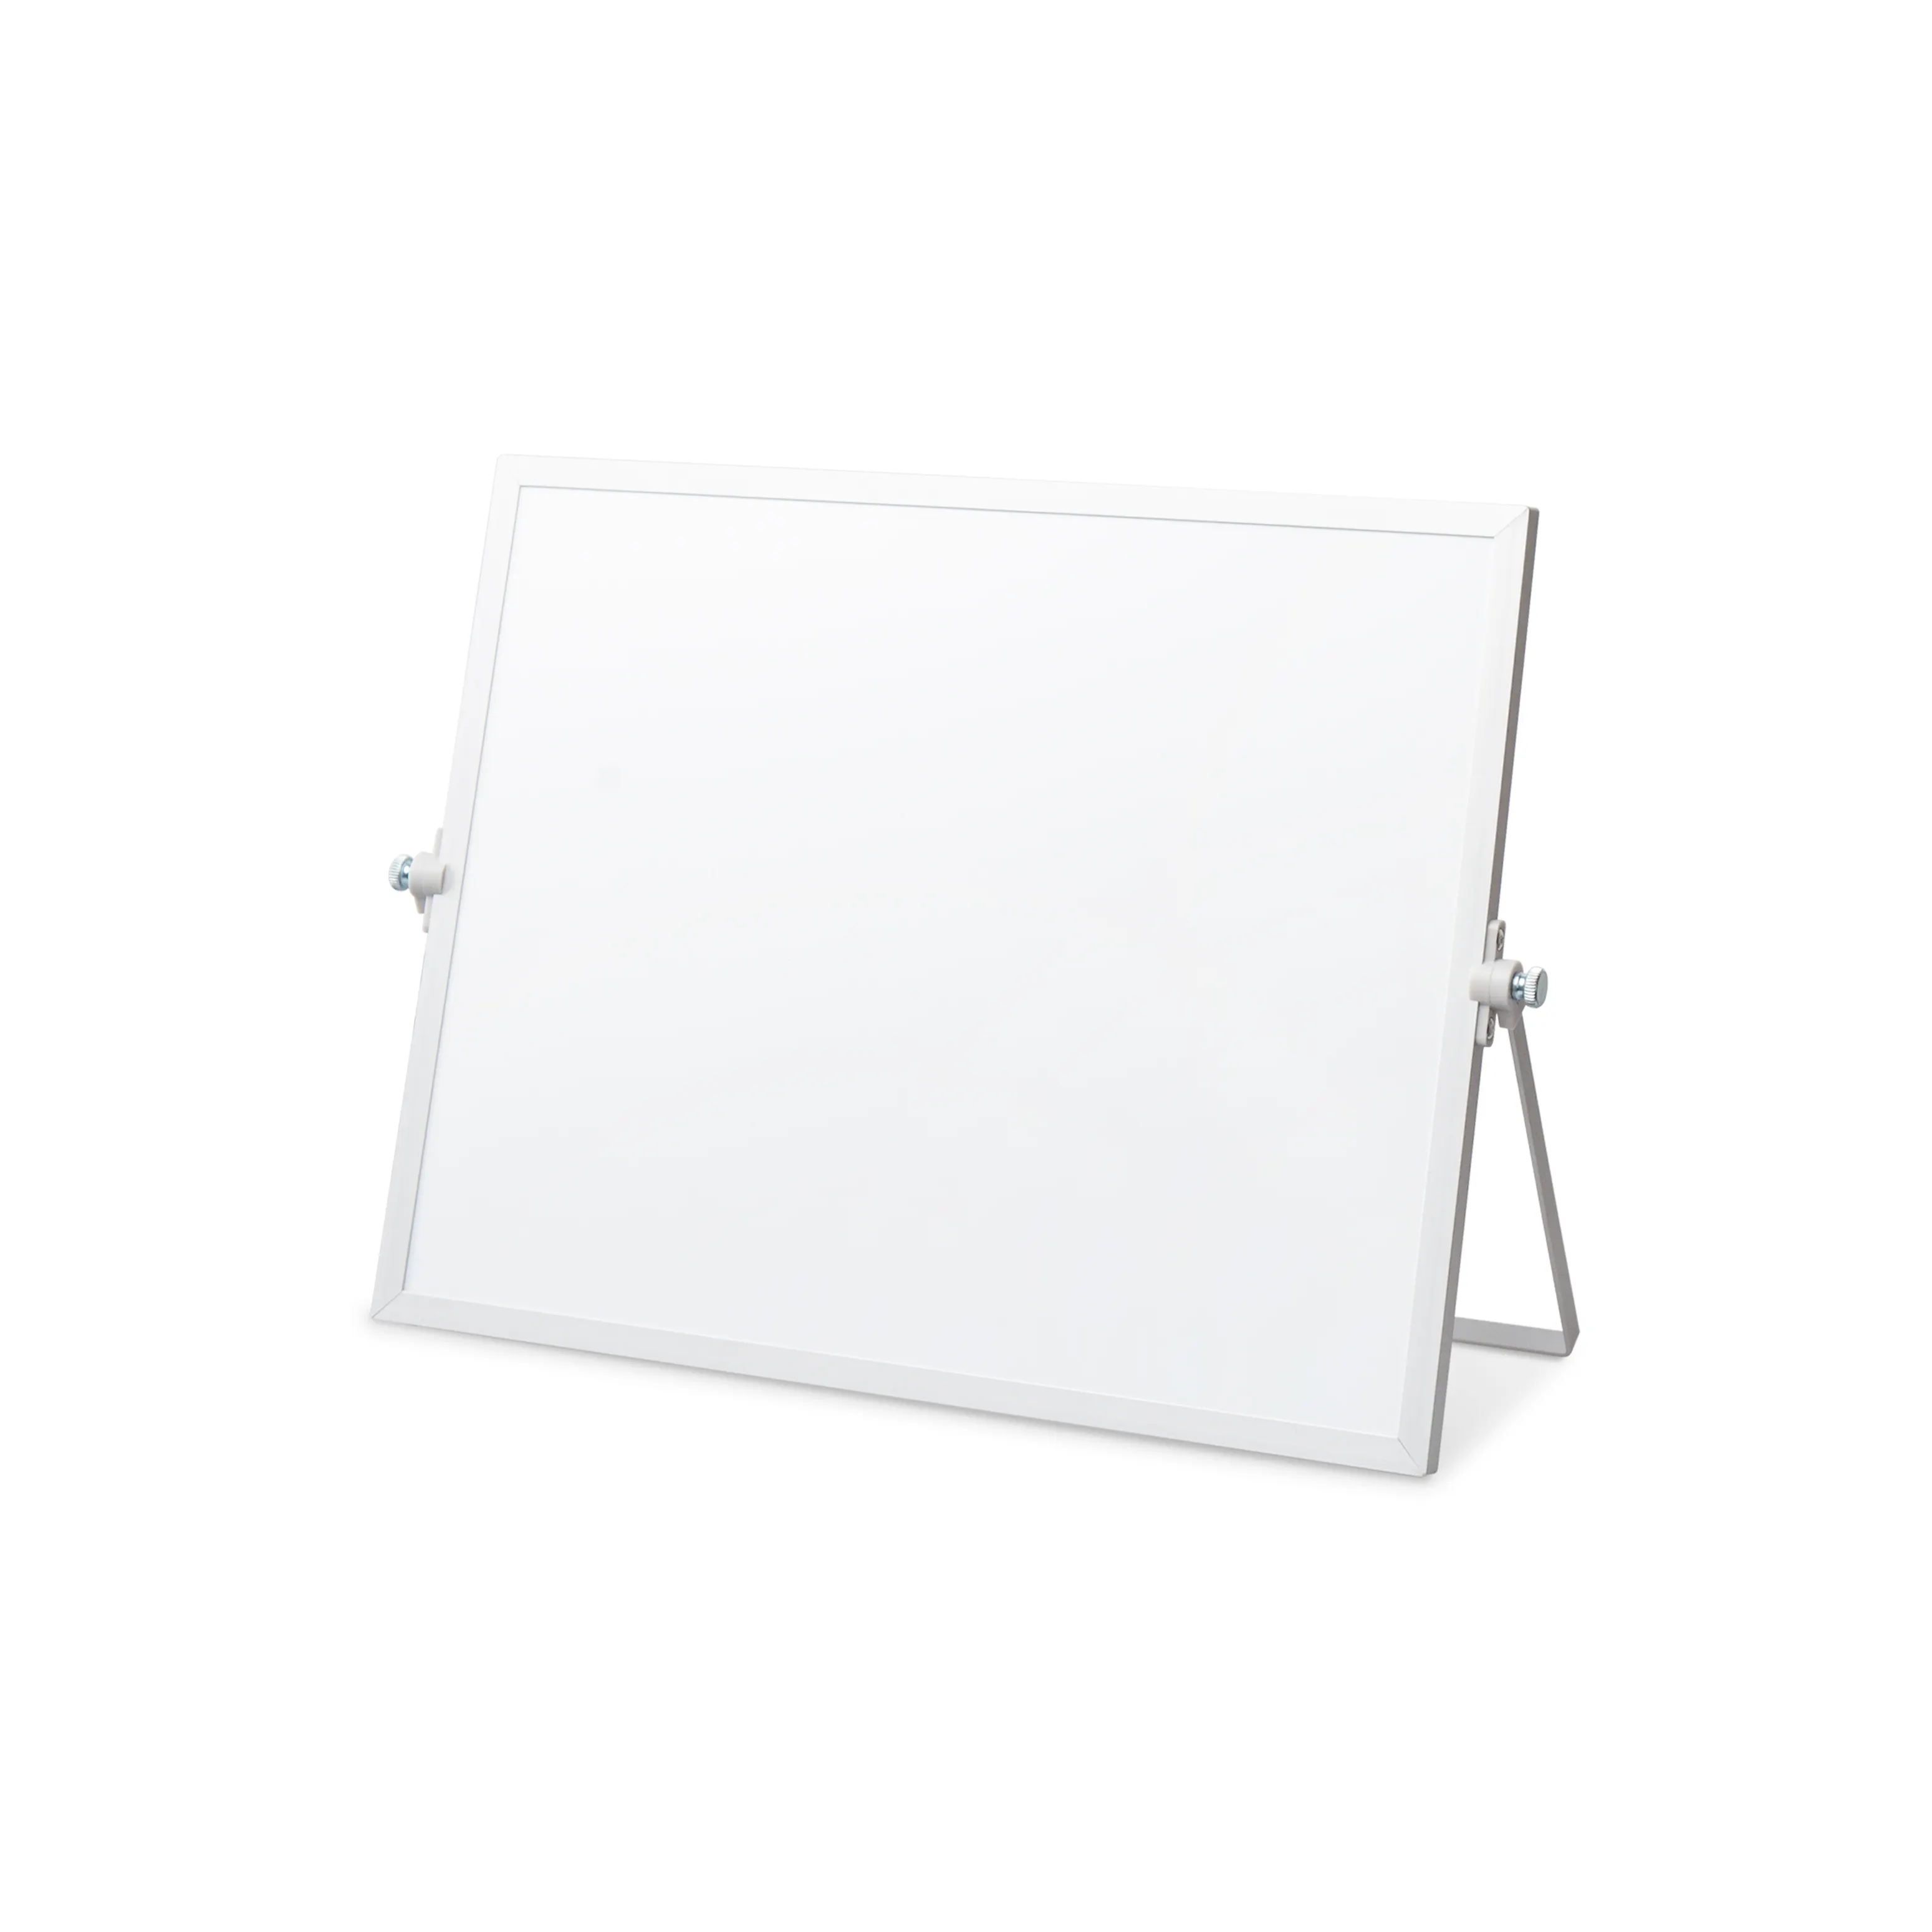 Aluminium Frame Desktop White Boards 10X10 8x12 Inches Weekly Planning Memo Notice Writing Calendar Board For Home Office